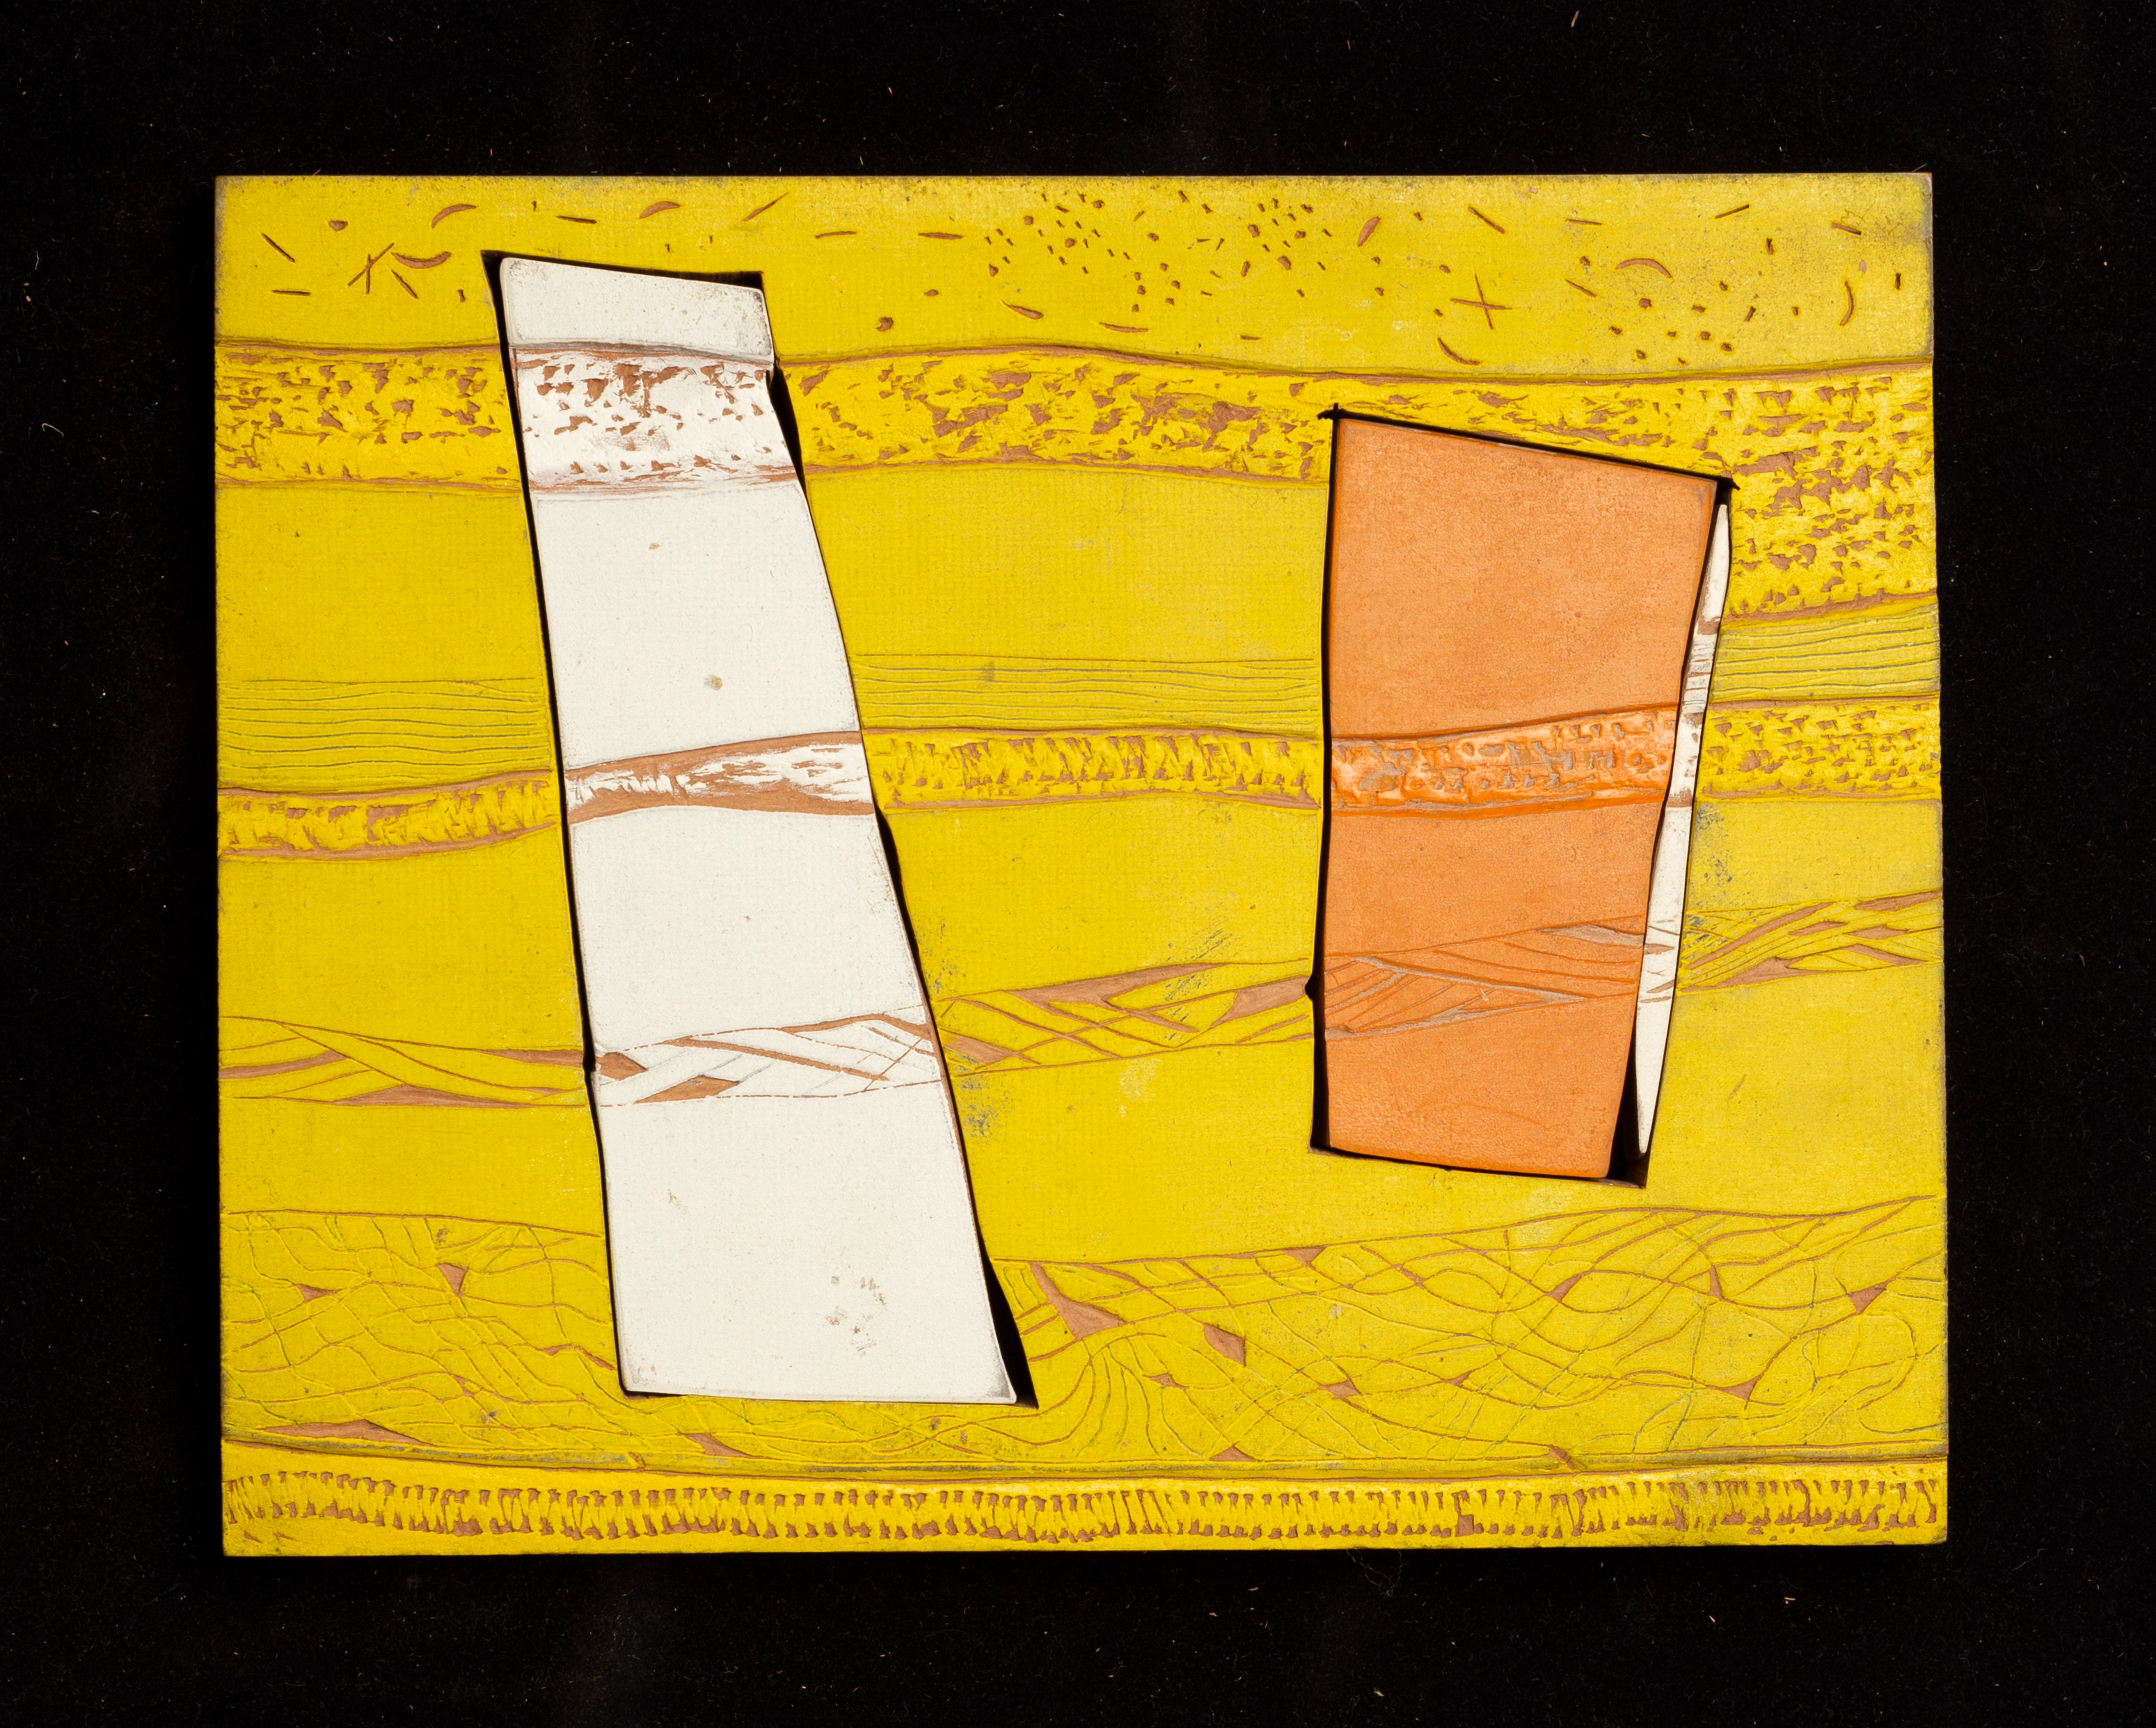 A yellow, rectangular, carved block of wood; two smaller rectangular pieces, white and orange, are inside.